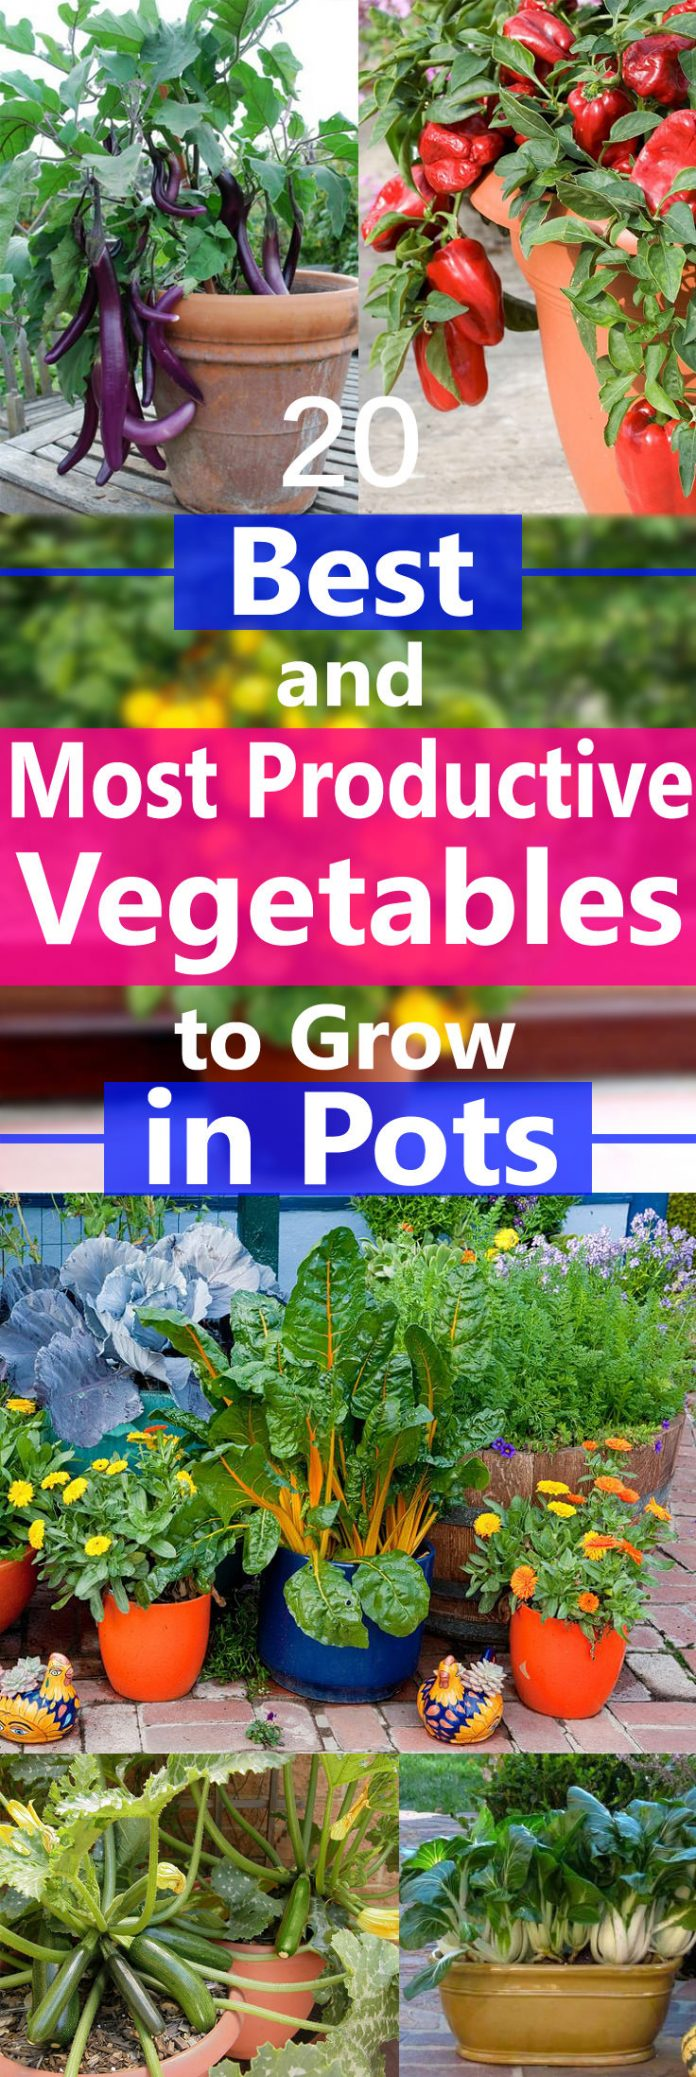 Best & Most Productive Vegetables to Grow in Pots -   10 planting Balcony sunny ideas